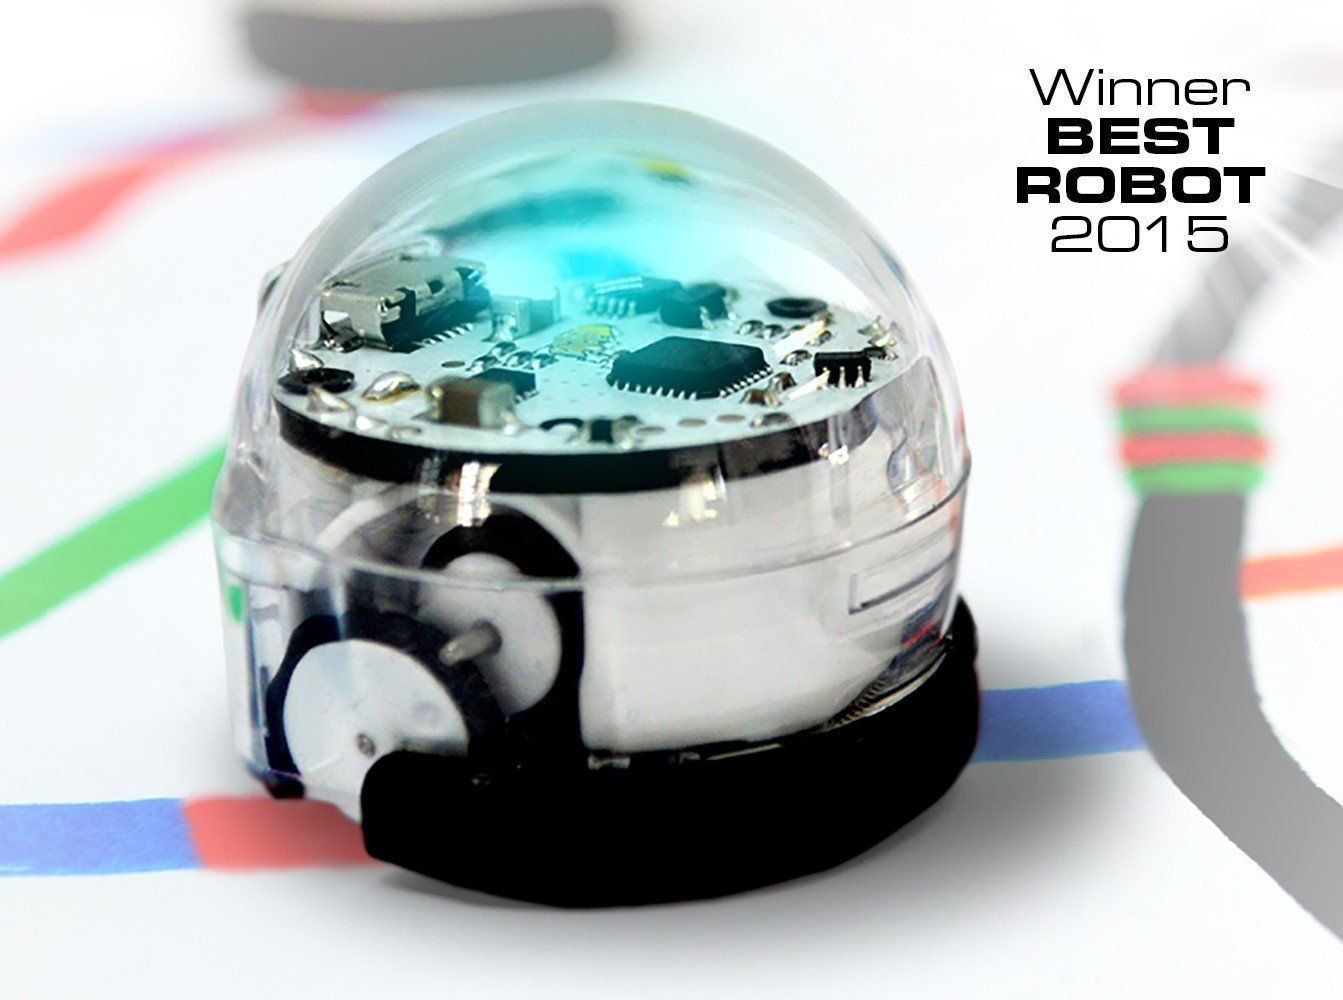 What are Ozobots? 